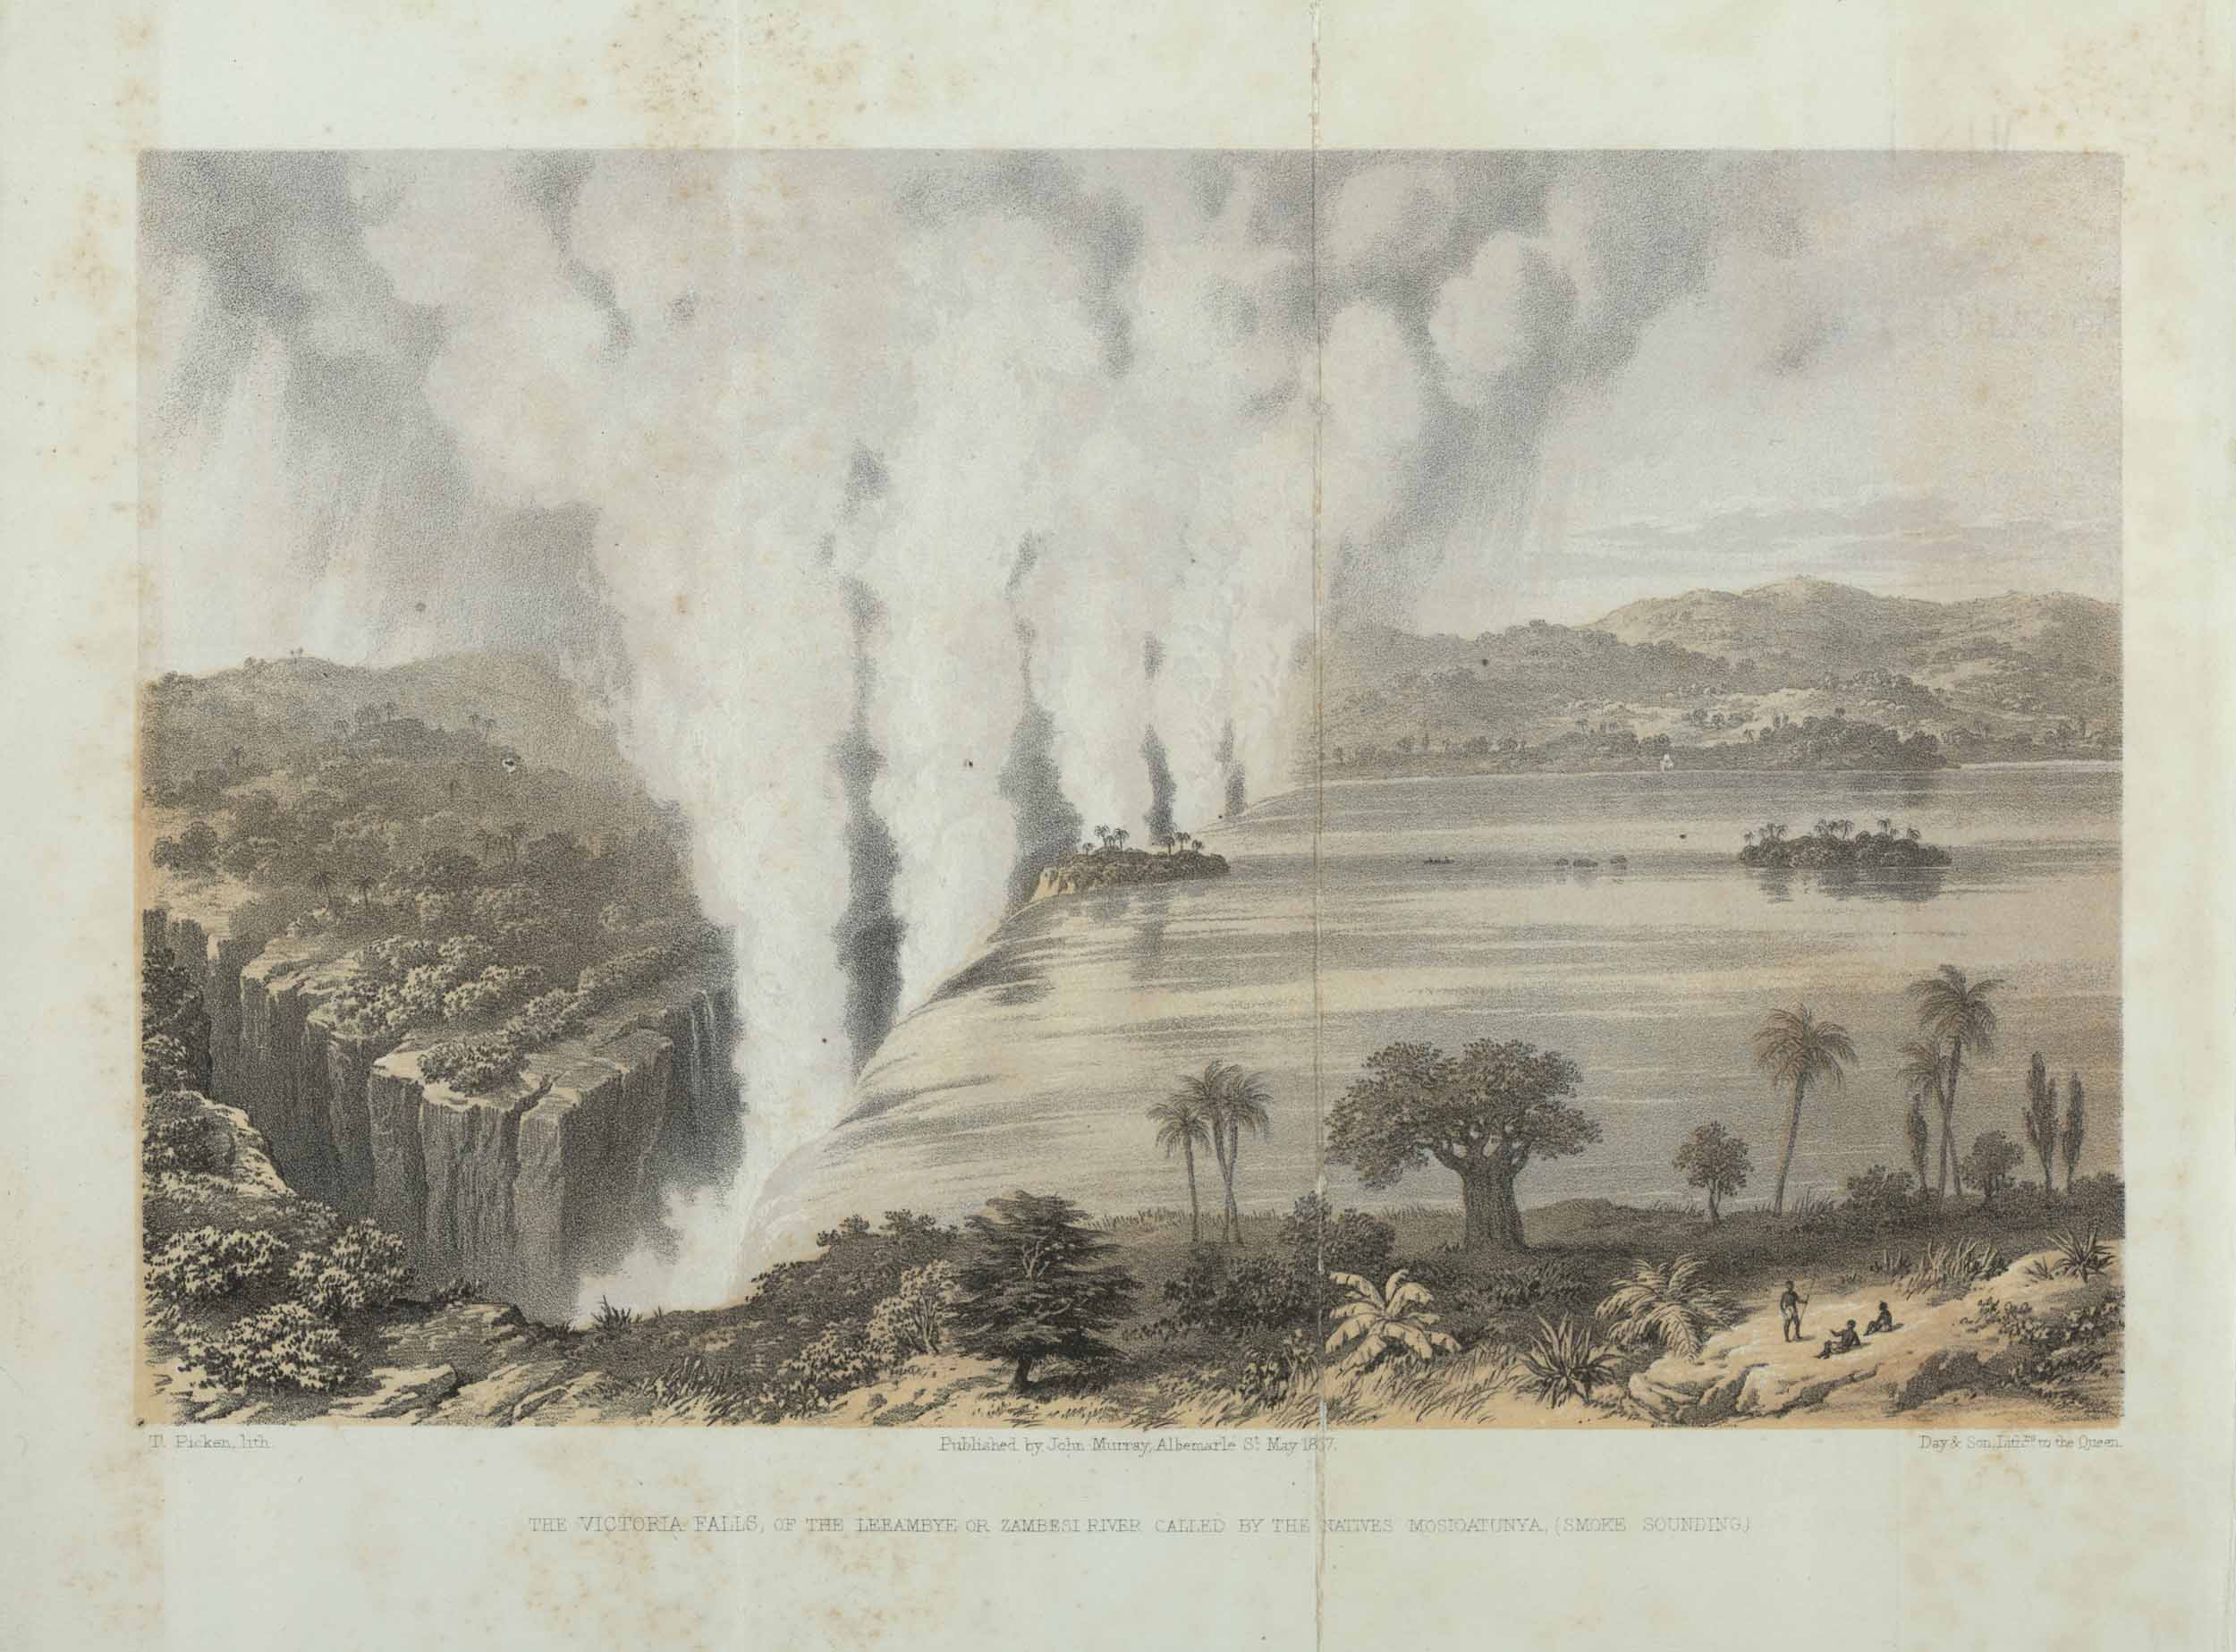 The Victoria Falls, of the Leeambye or Zambesi River Called by the Natives Mosioatunya (Smoke Sounding), Missionary Travels, 1857 Copyright National Library of Scotland. Creative Commons Share-alike 2.5 UK: Scotland(https://creativecommons.org/licenses/by-nc-sa/2.5/scotland/).